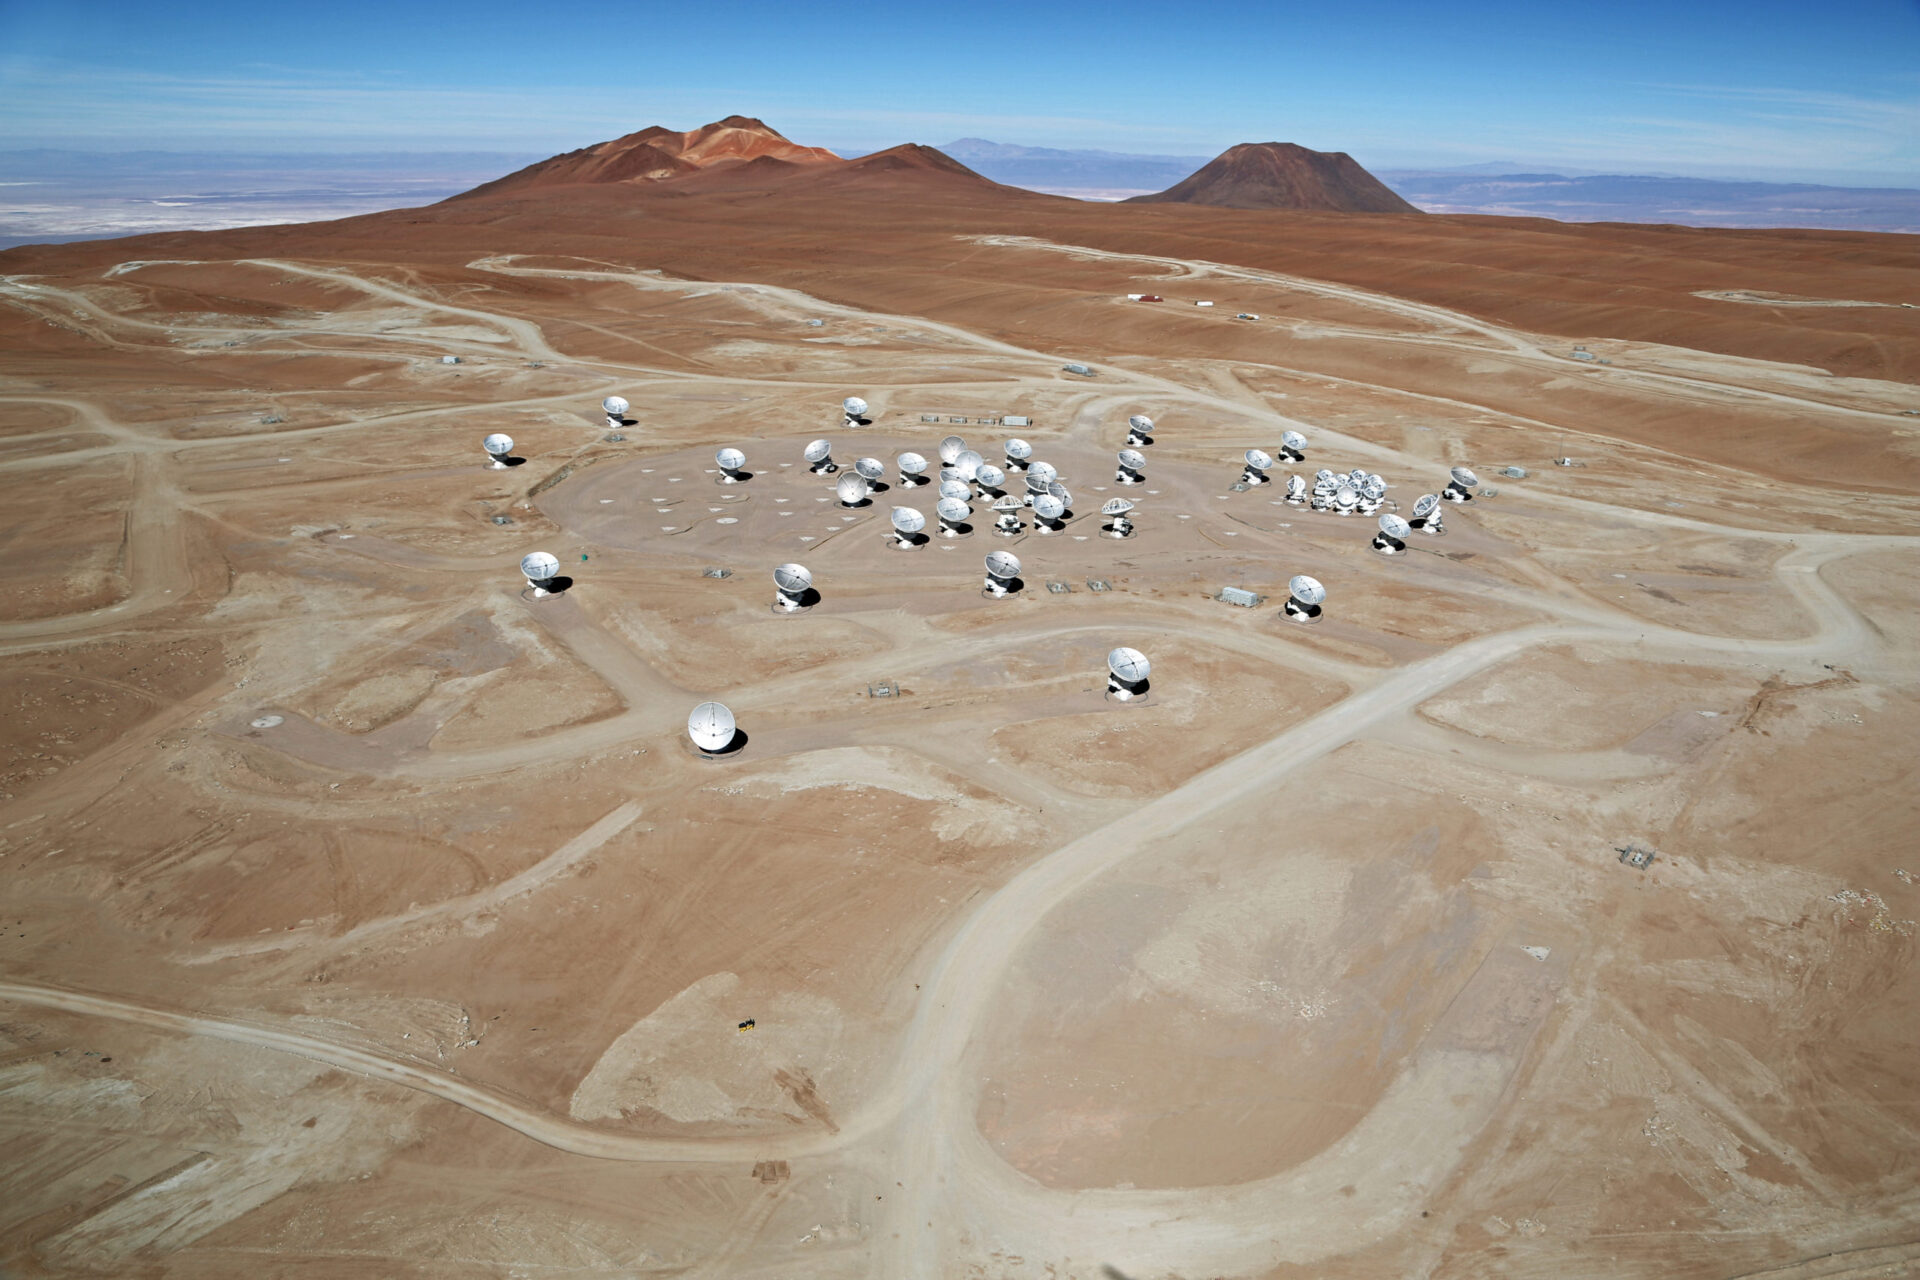 ALMA array by the 